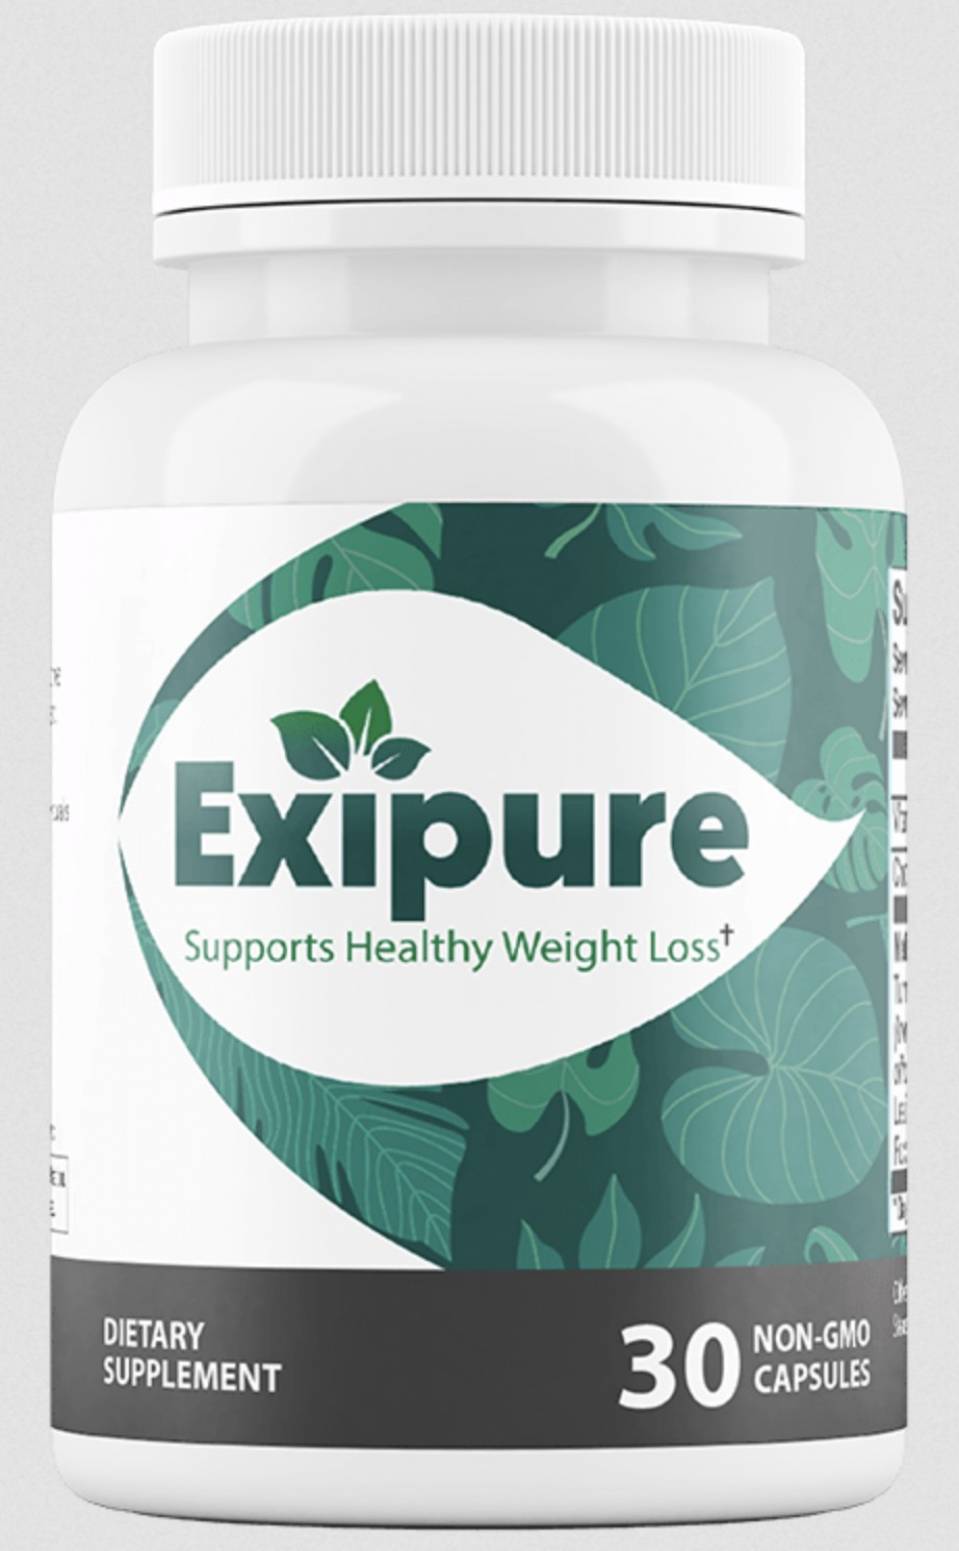 Is Exipure Really Work